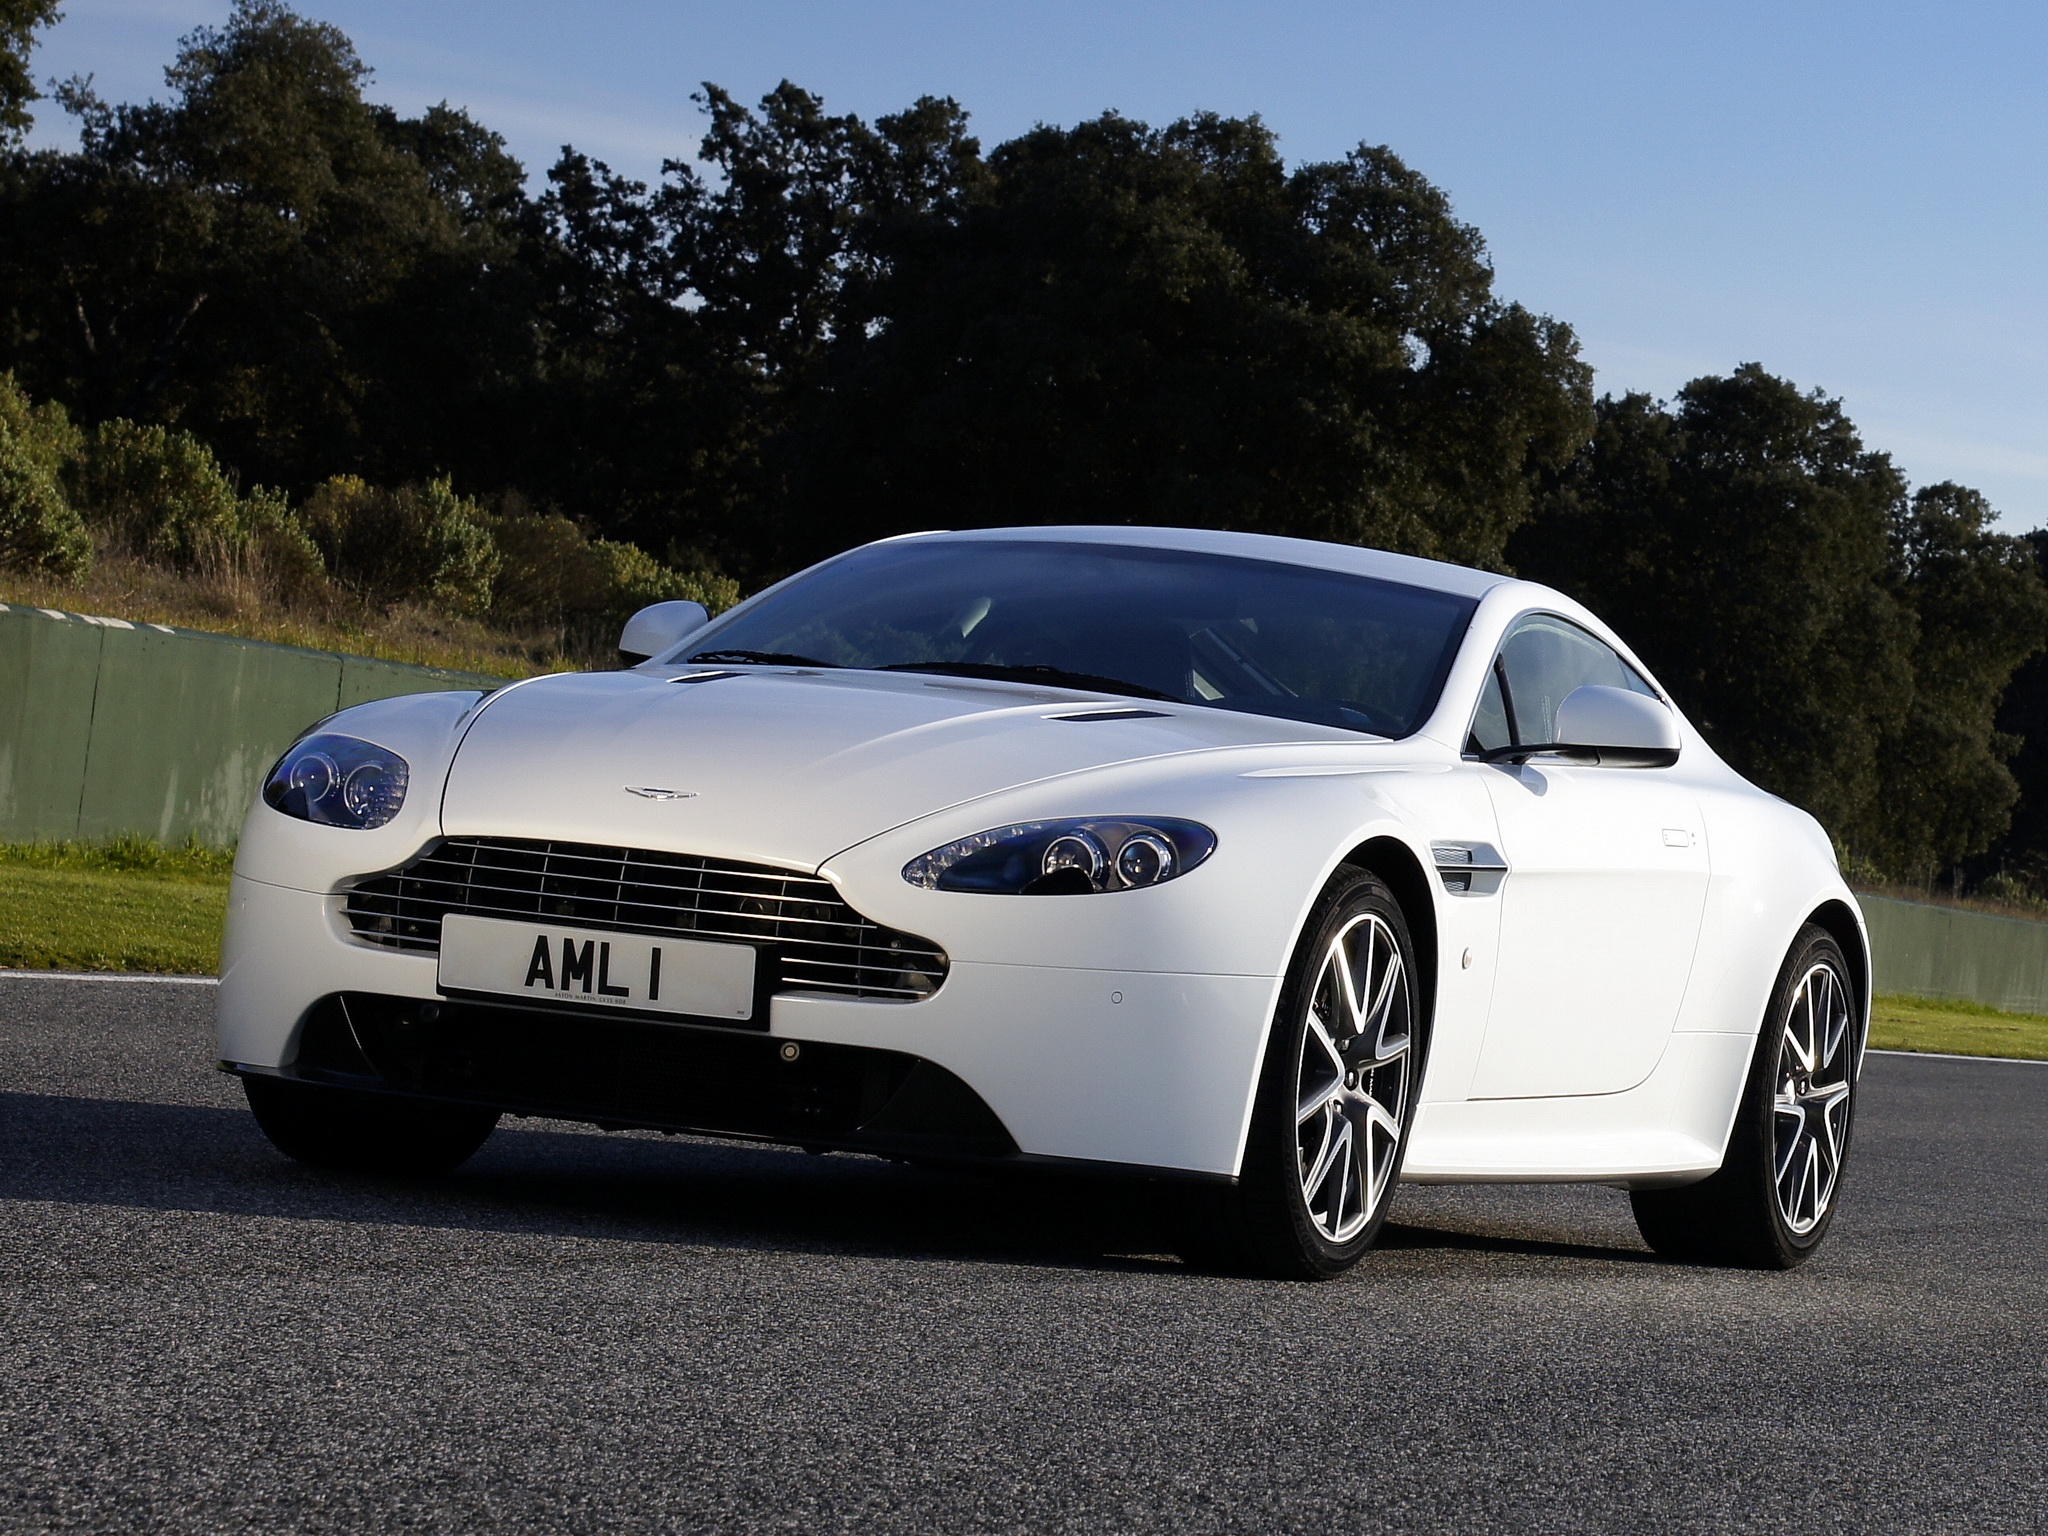 cars, auto, trees, aston martin, white, front view, 2011, v8, vantage High Definition image